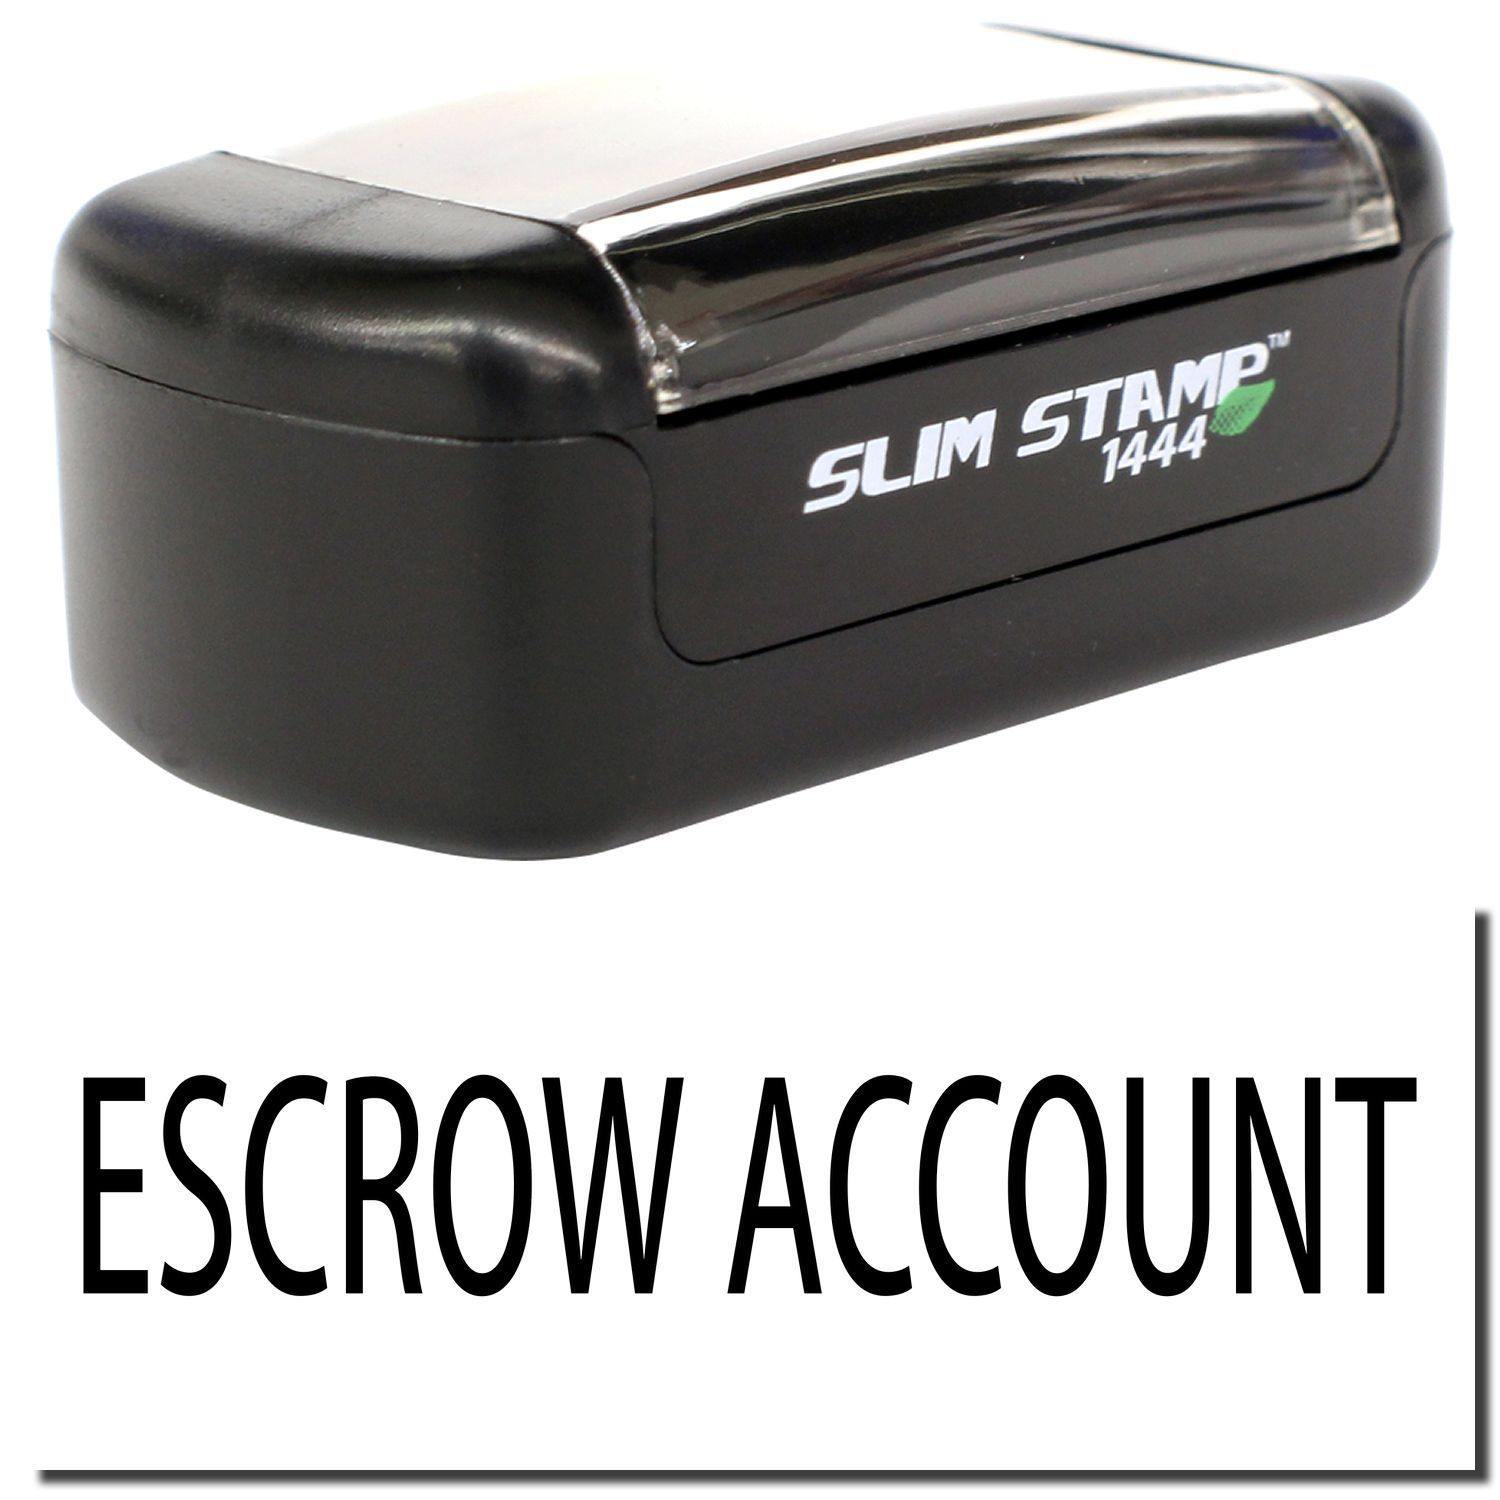 A stock office pre-inked stamp with a stamped image showing how the text "ESCROW ACCOUNT" is displayed after stamping.